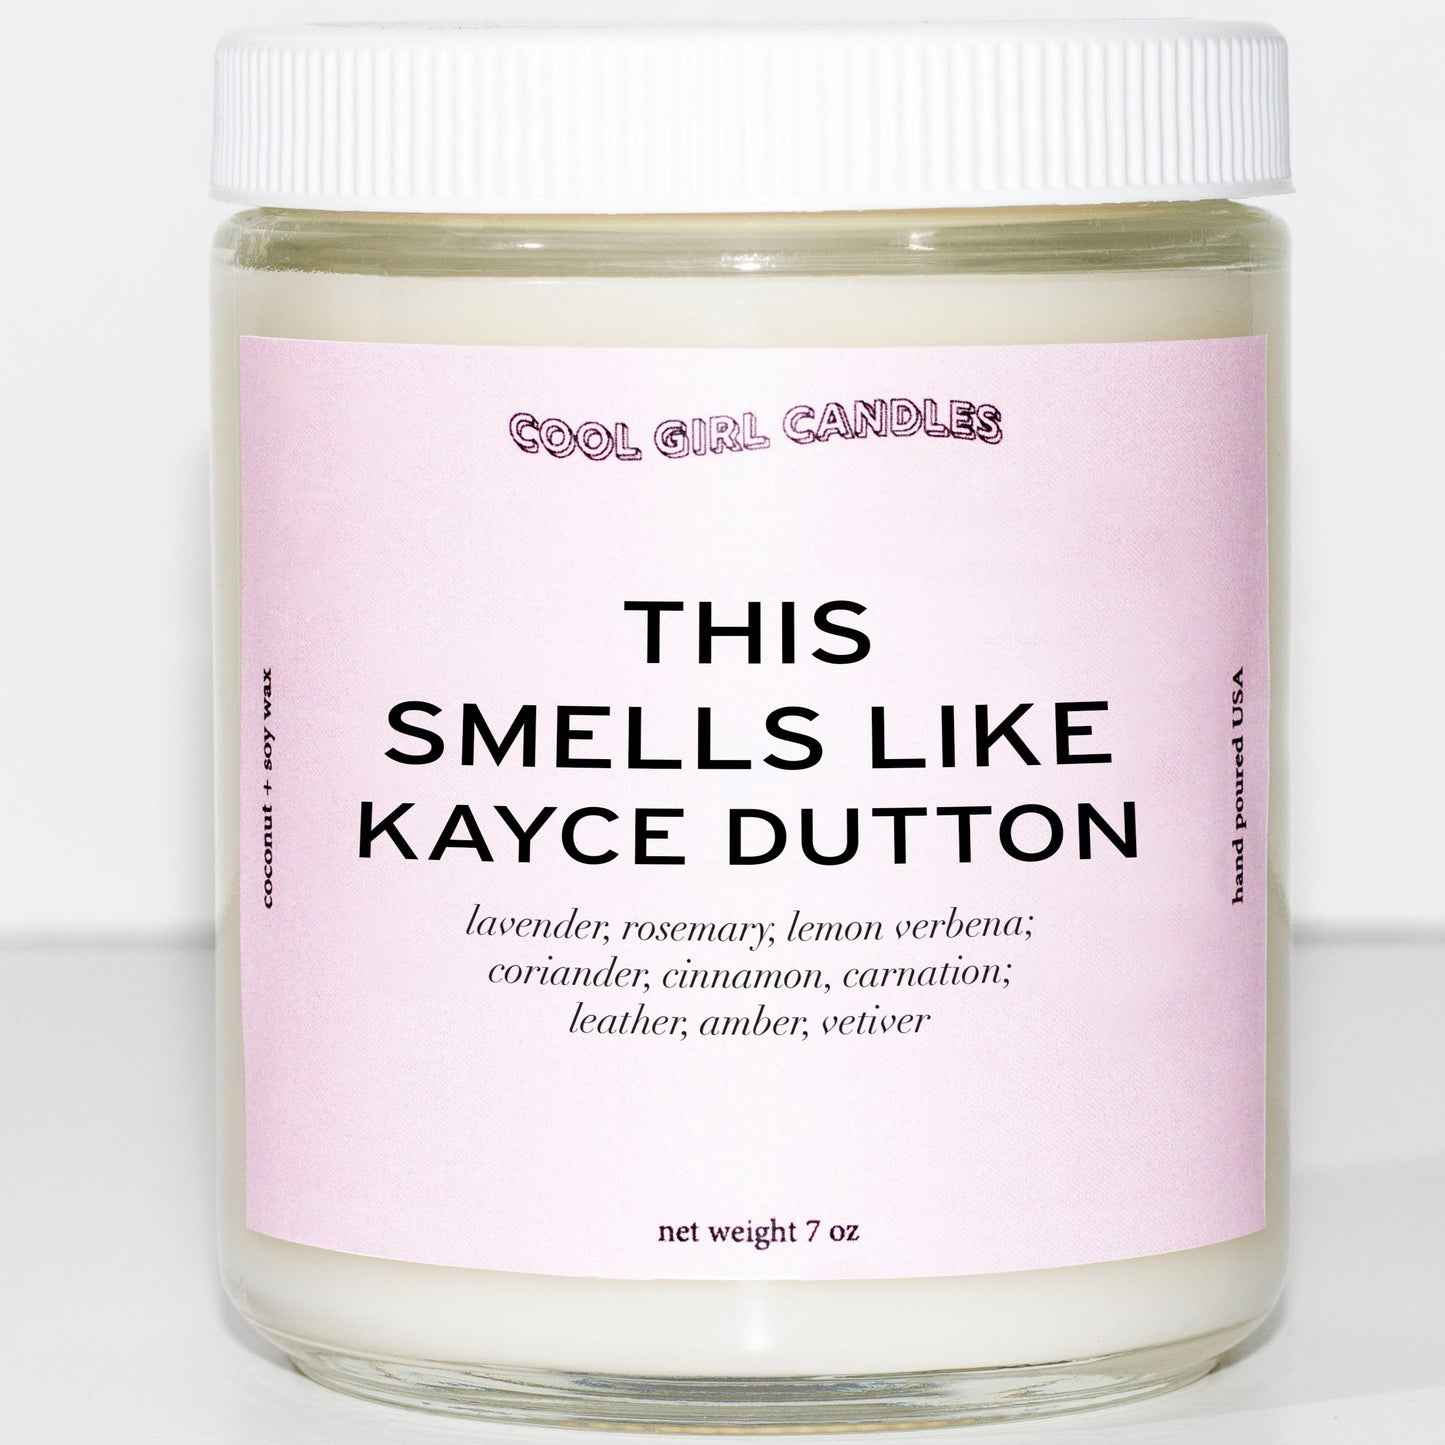 A gift for Yellowstone fans. A kayce dutton scented candle for your favorite yellowstone character and ranch hand played by Luke Grimes